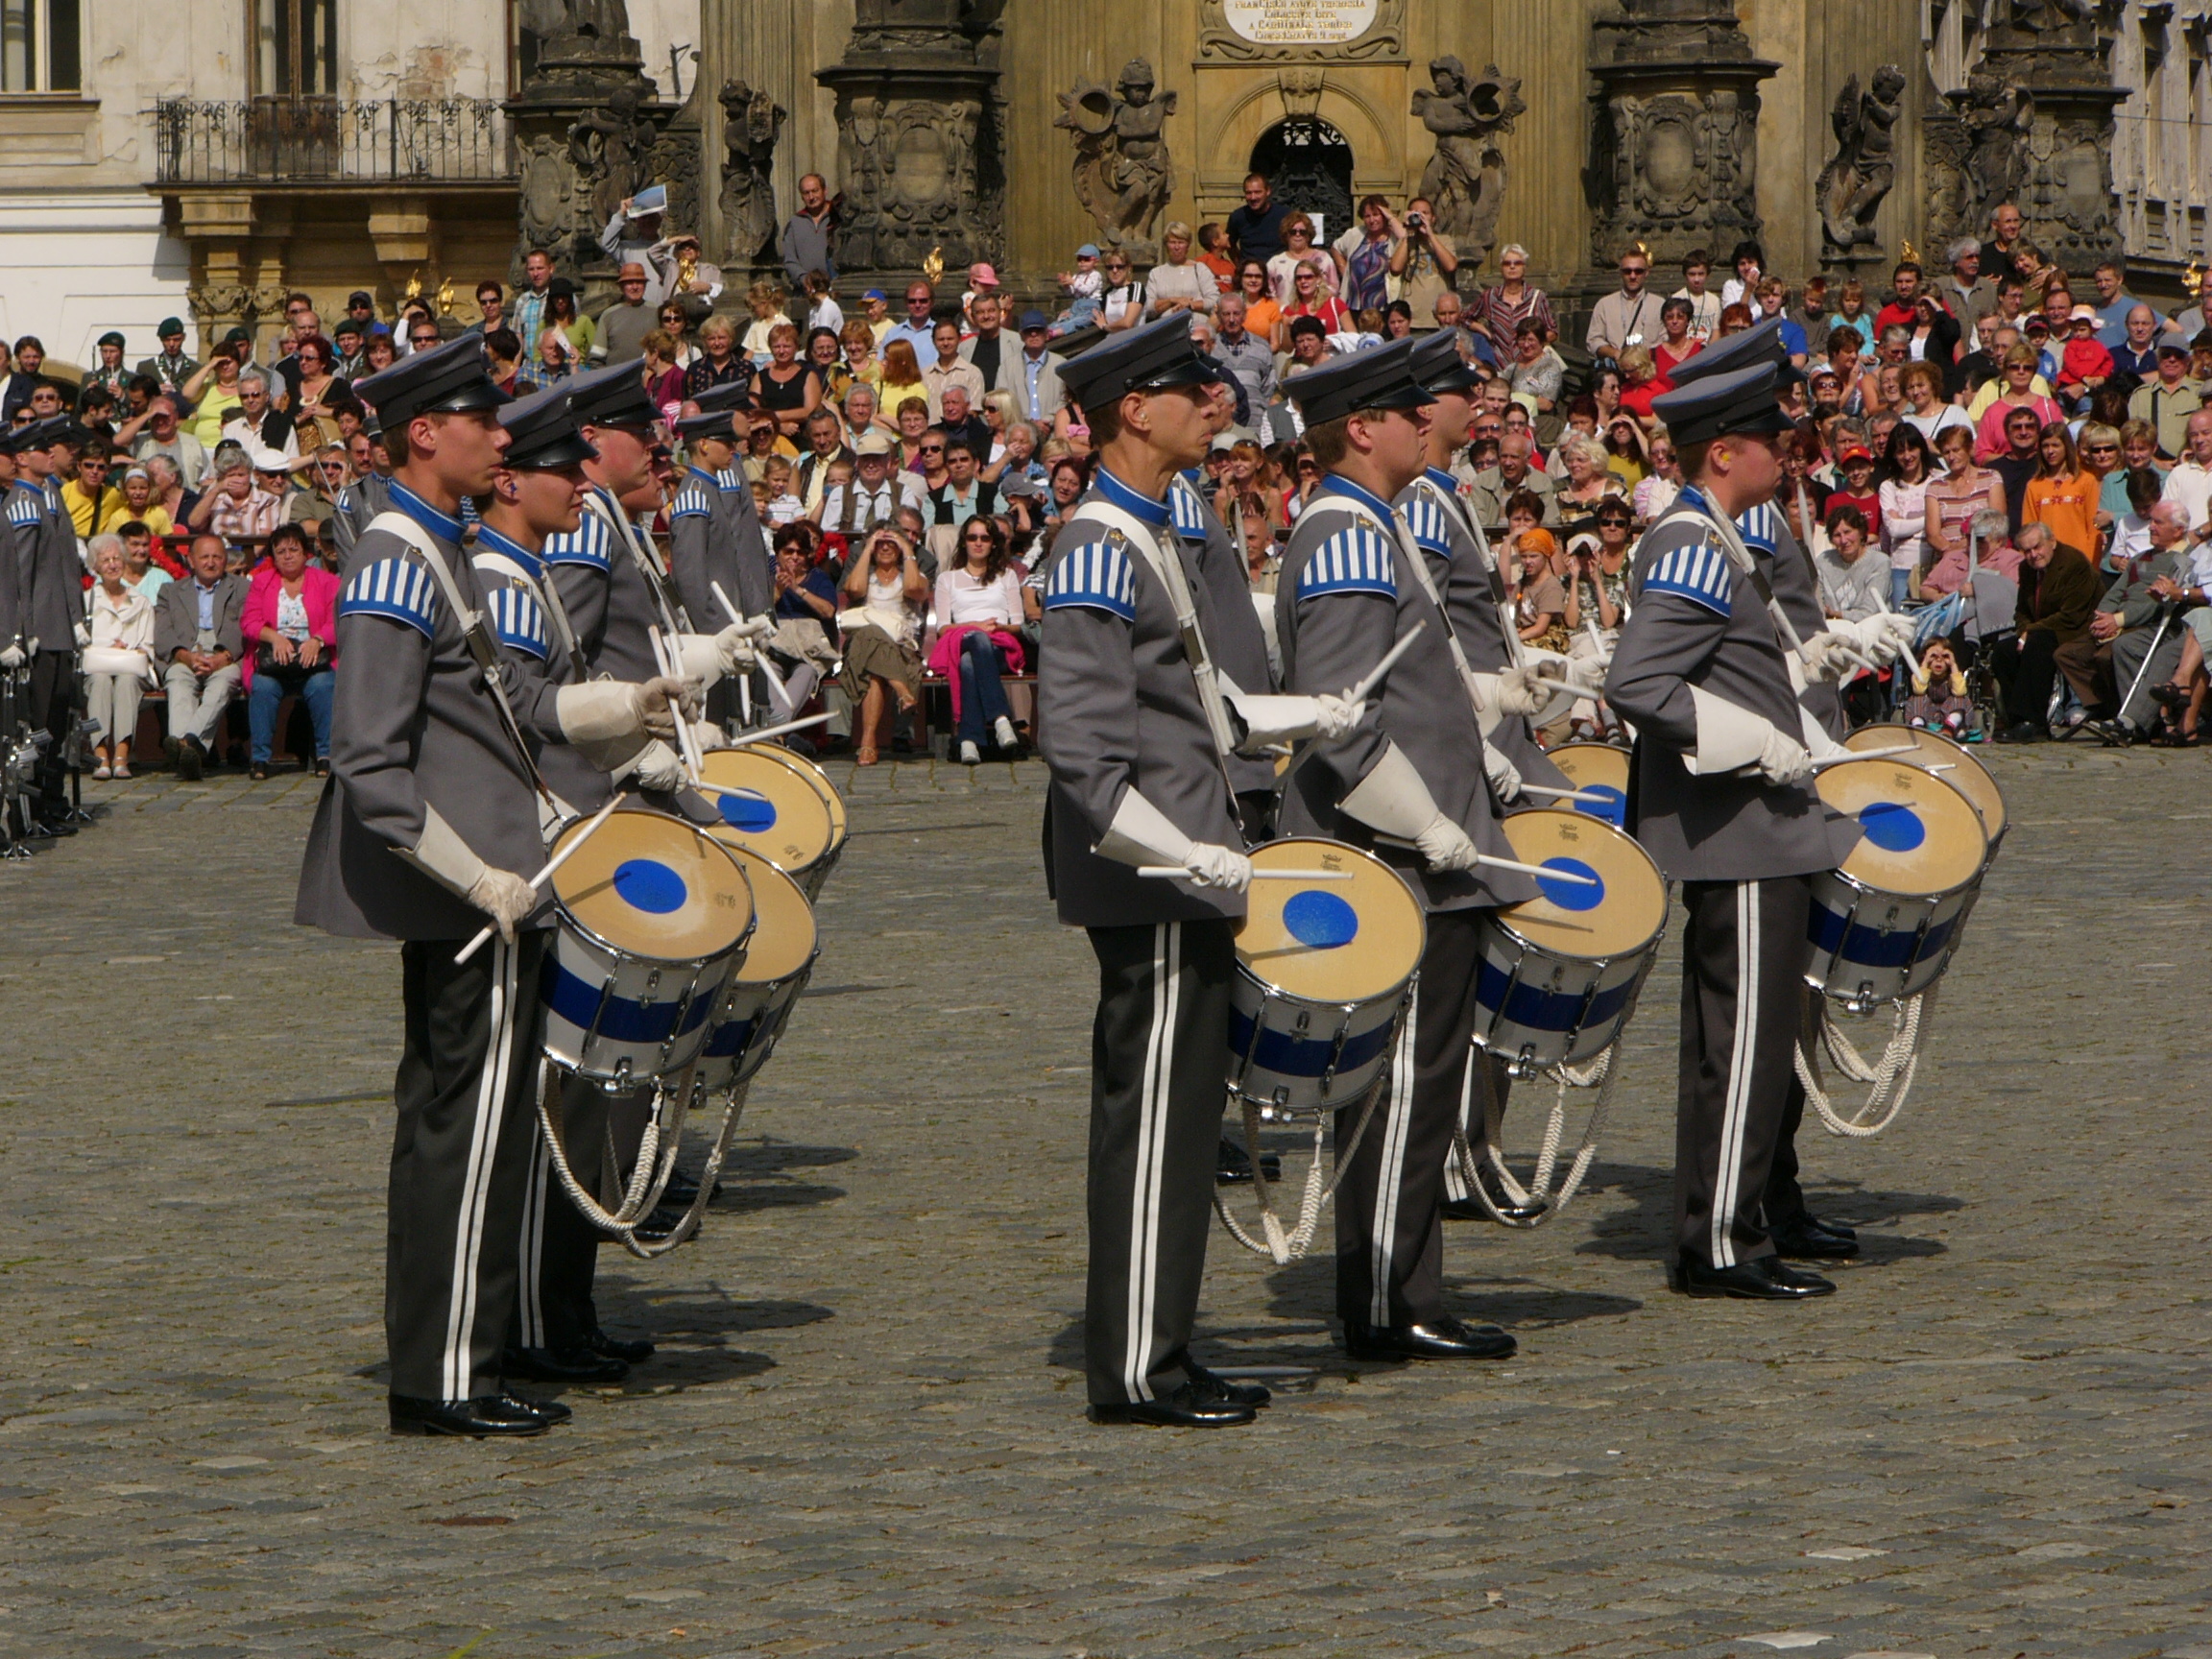 File:Finland military band drums.jpg - Wikimedia Commons